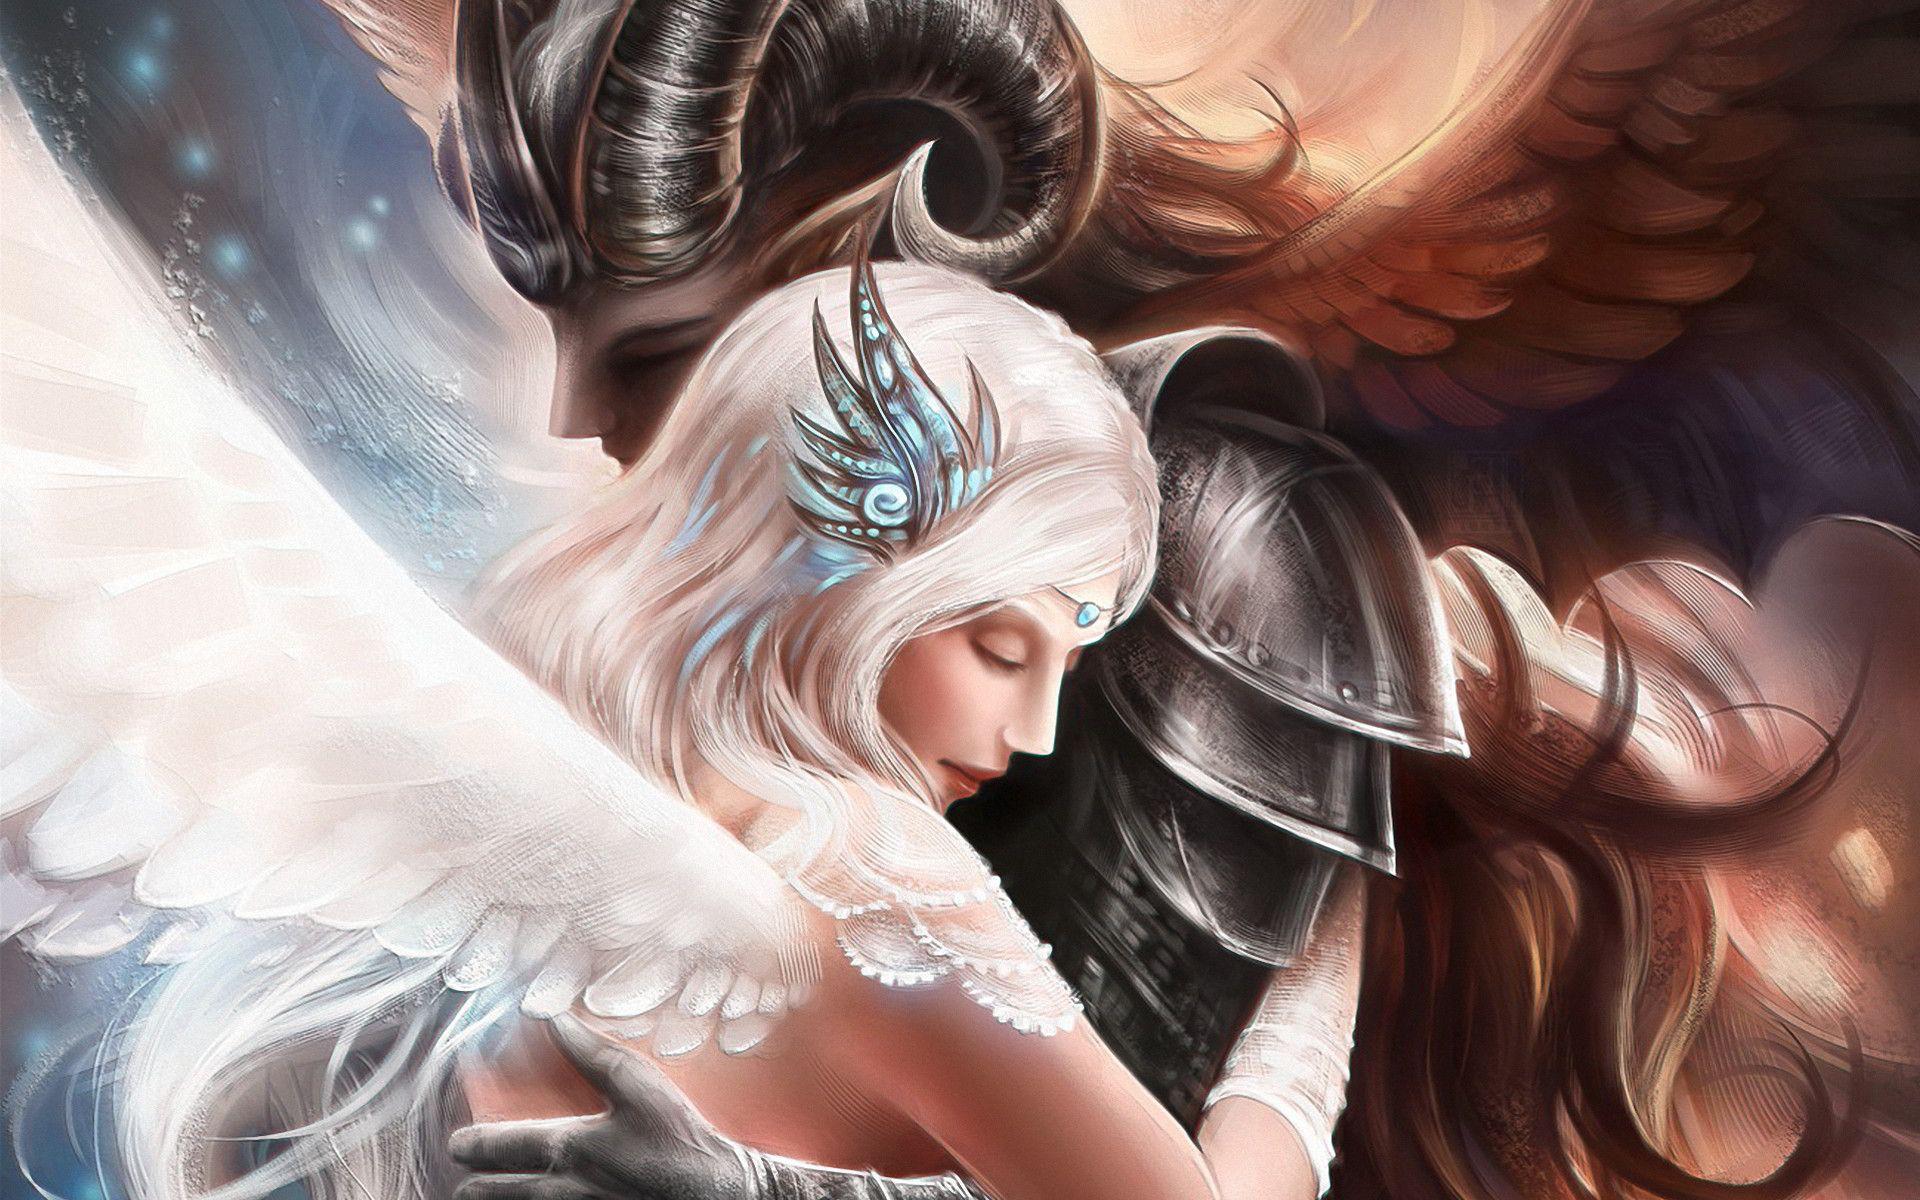 Anime Angel and Devil Wallpapers - Top Free Anime Angel and Devil ...